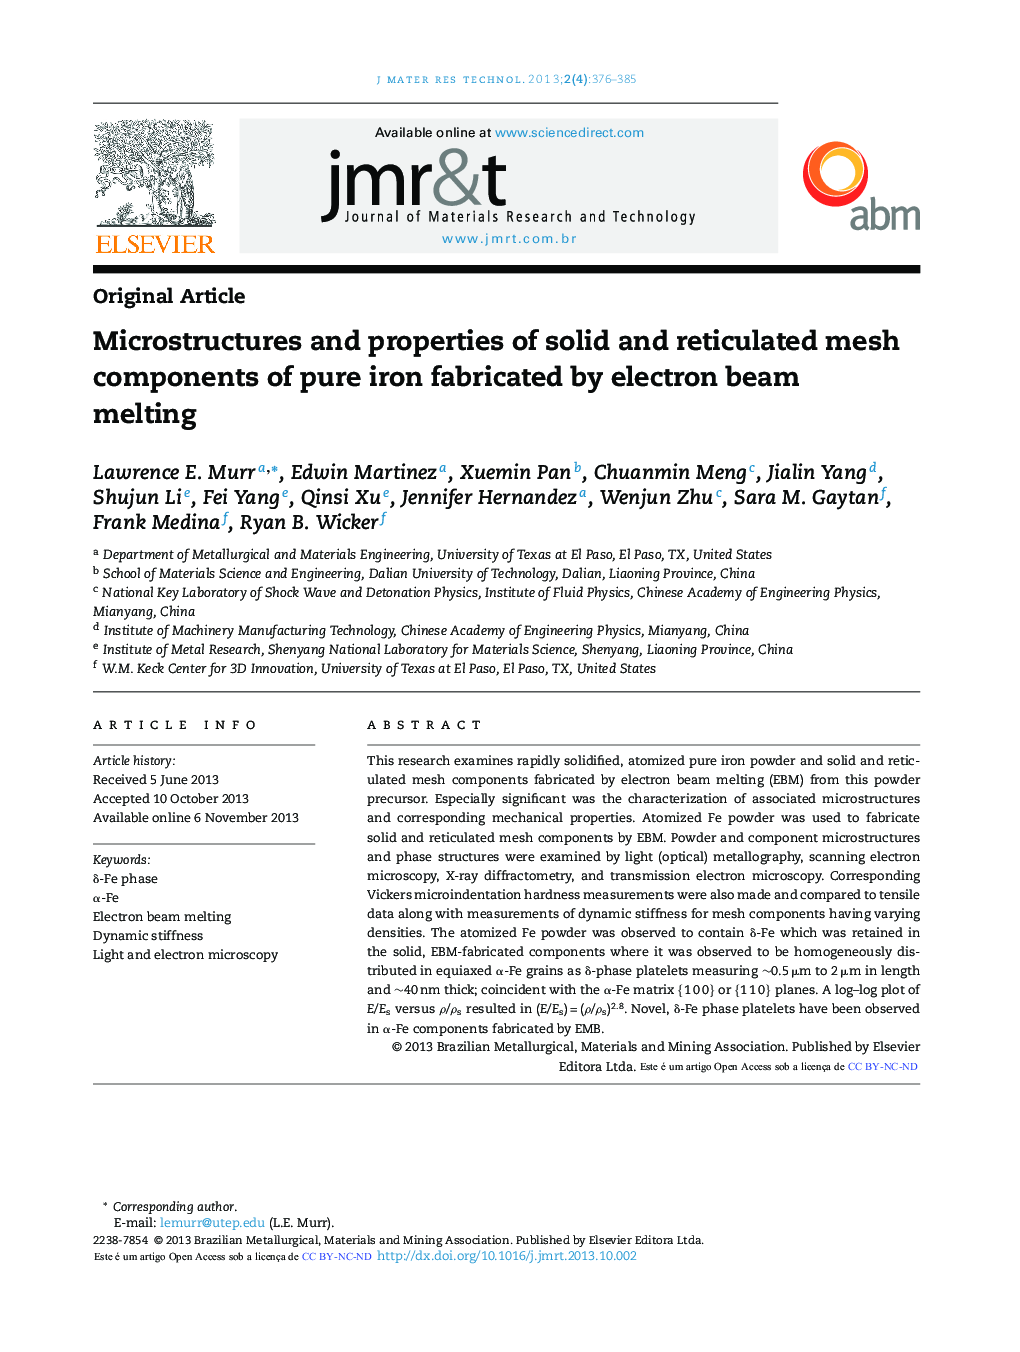 Microstructures and properties of solid and reticulated mesh components of pure iron fabricated by electron beam melting